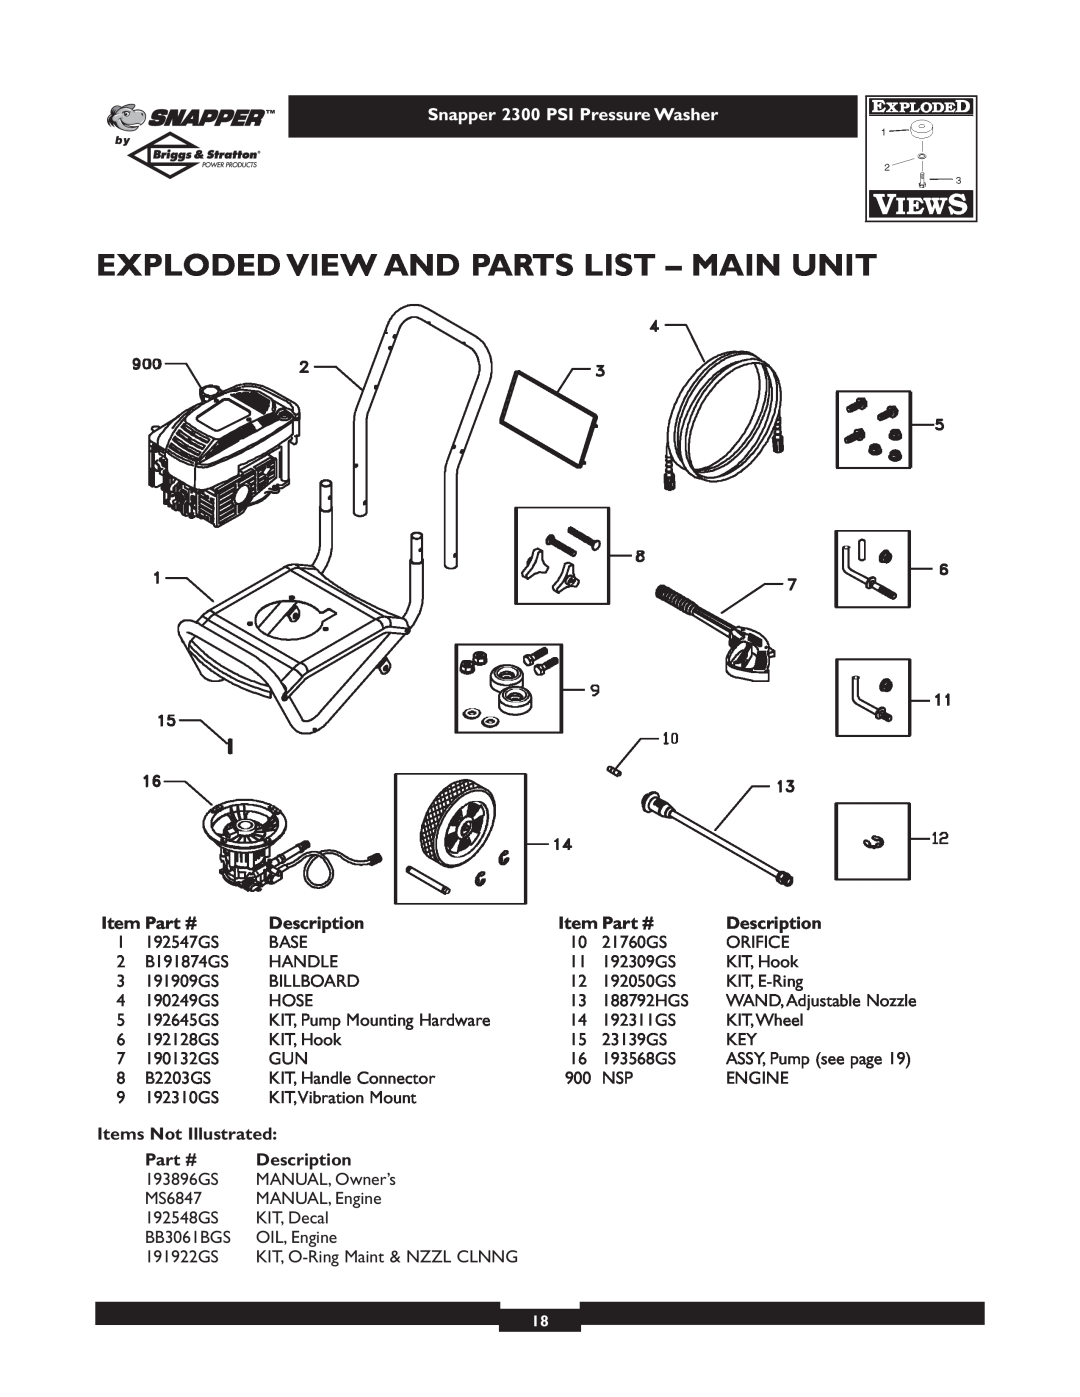 Snapper 1807-1 owner manual Exploded View And Parts List - Main Unit, Description, Items Not Illustrated 